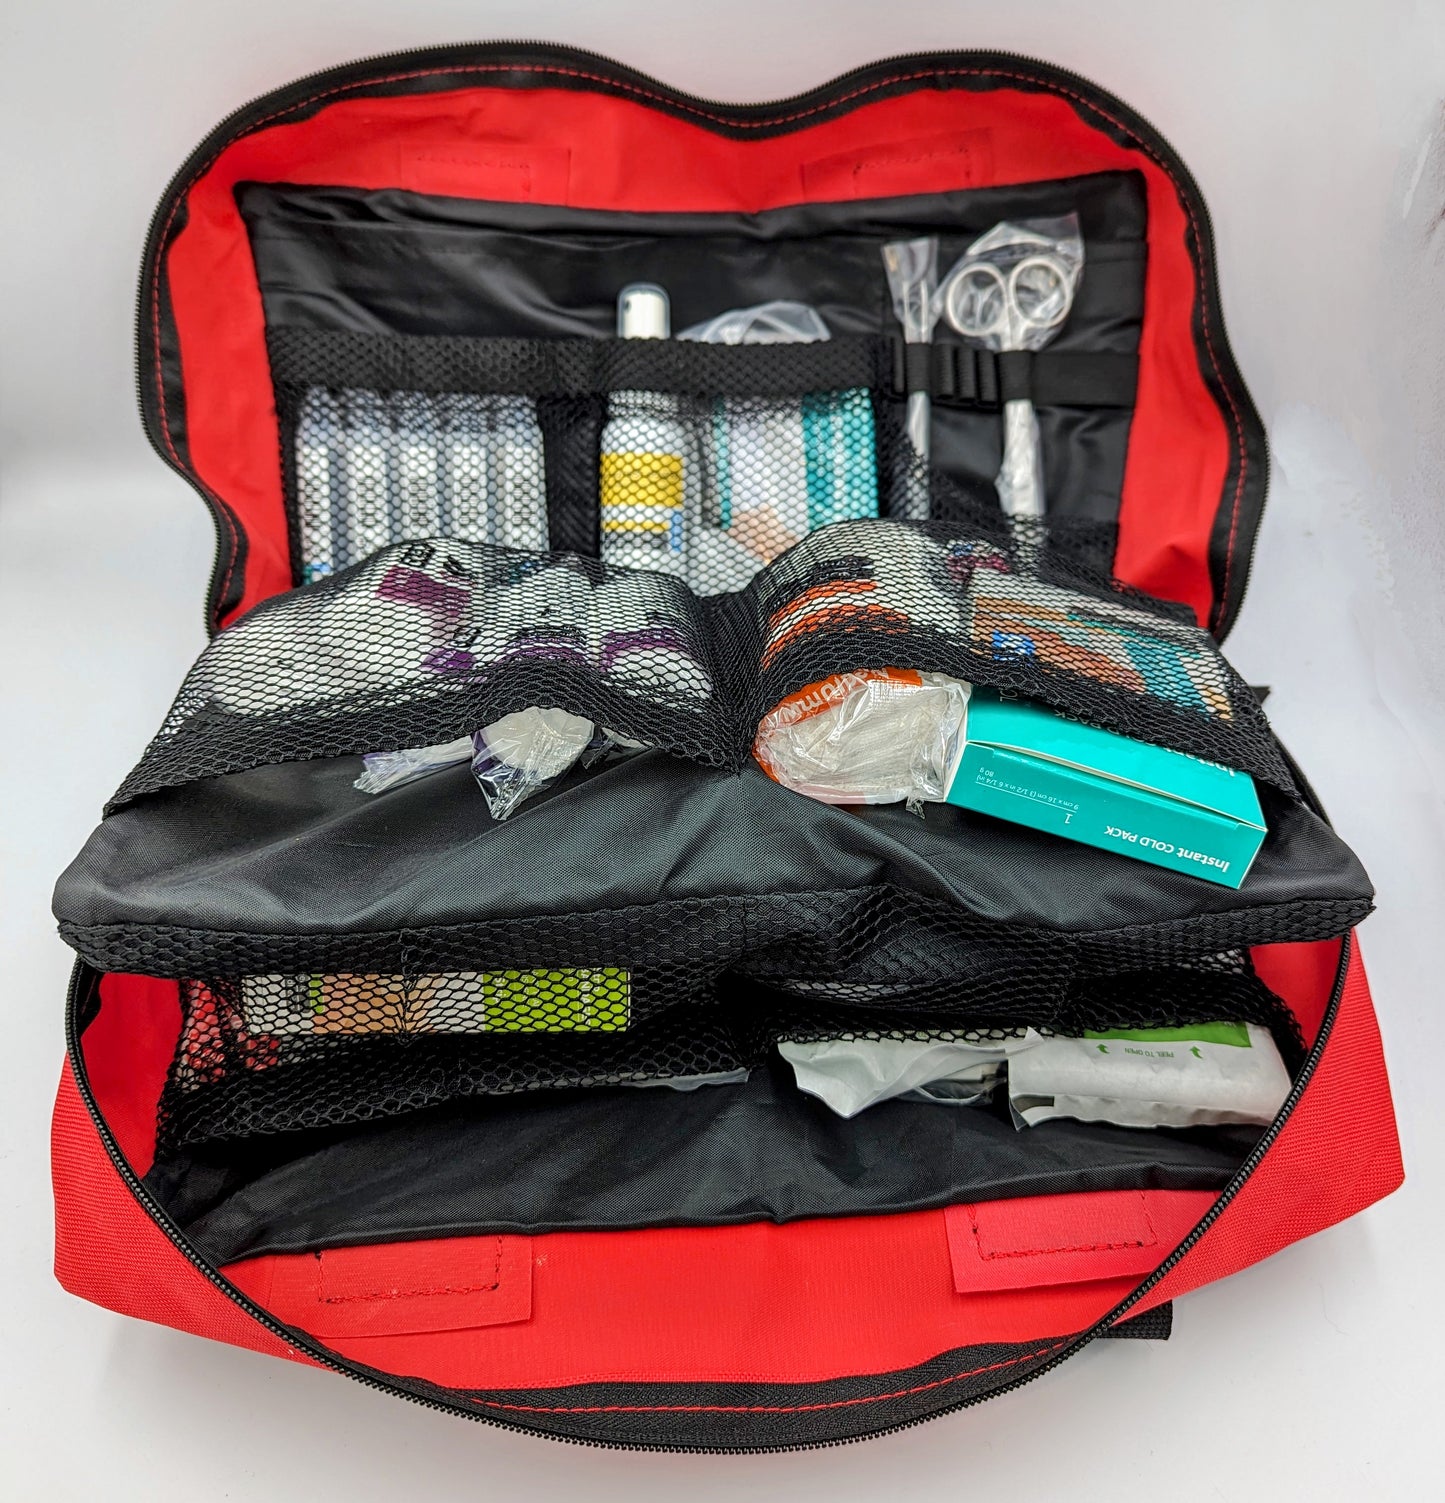 First Aid Kit Soft Bag Workplace Compliant 10 Person